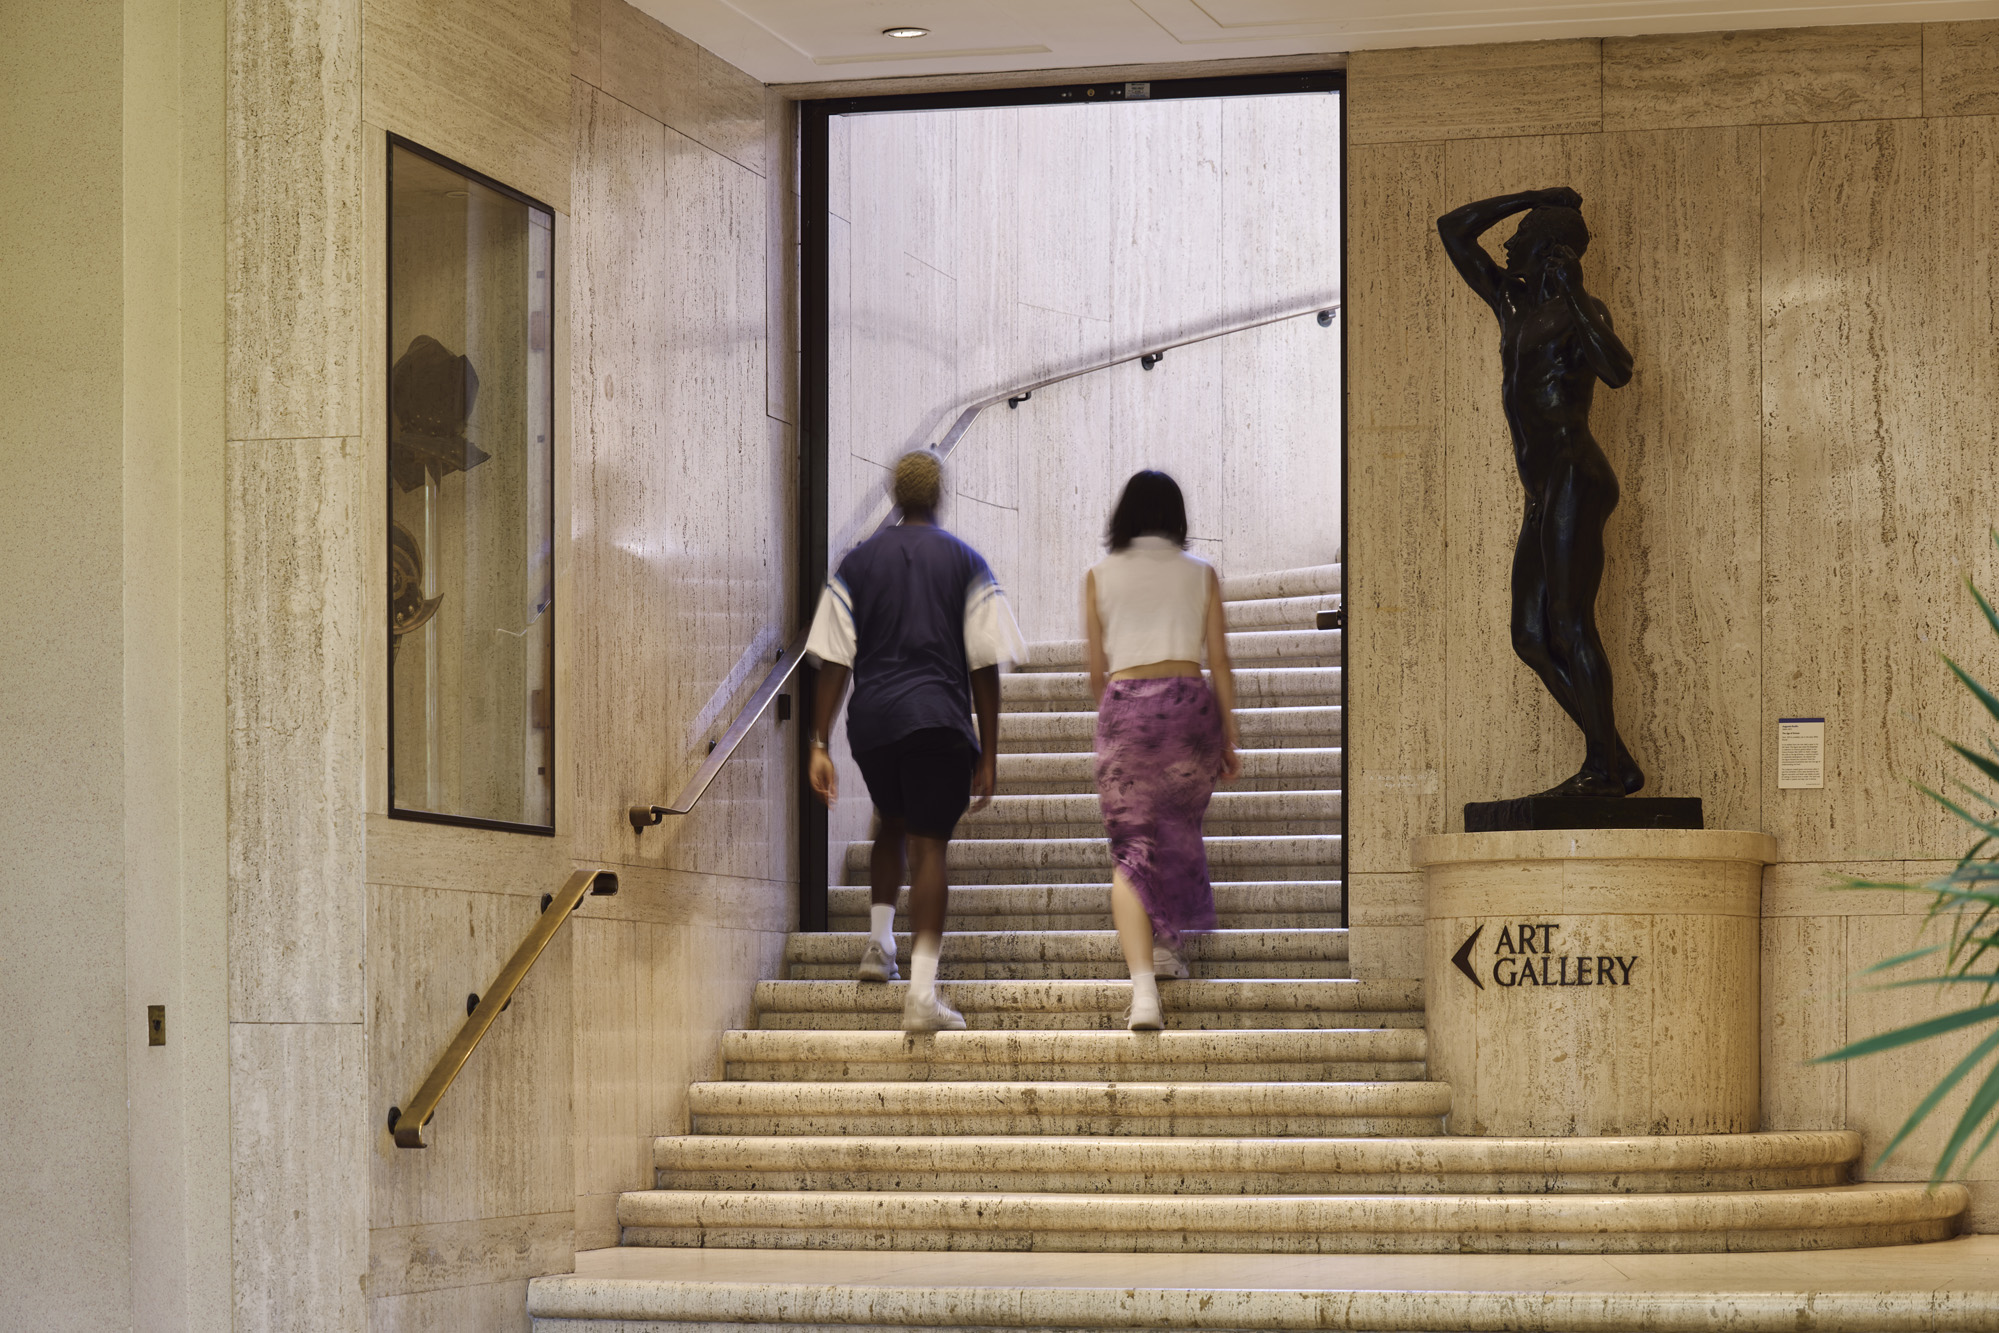 Two people walking up some stairs at the Barber Gallery with a sign pointing to the art gallery 